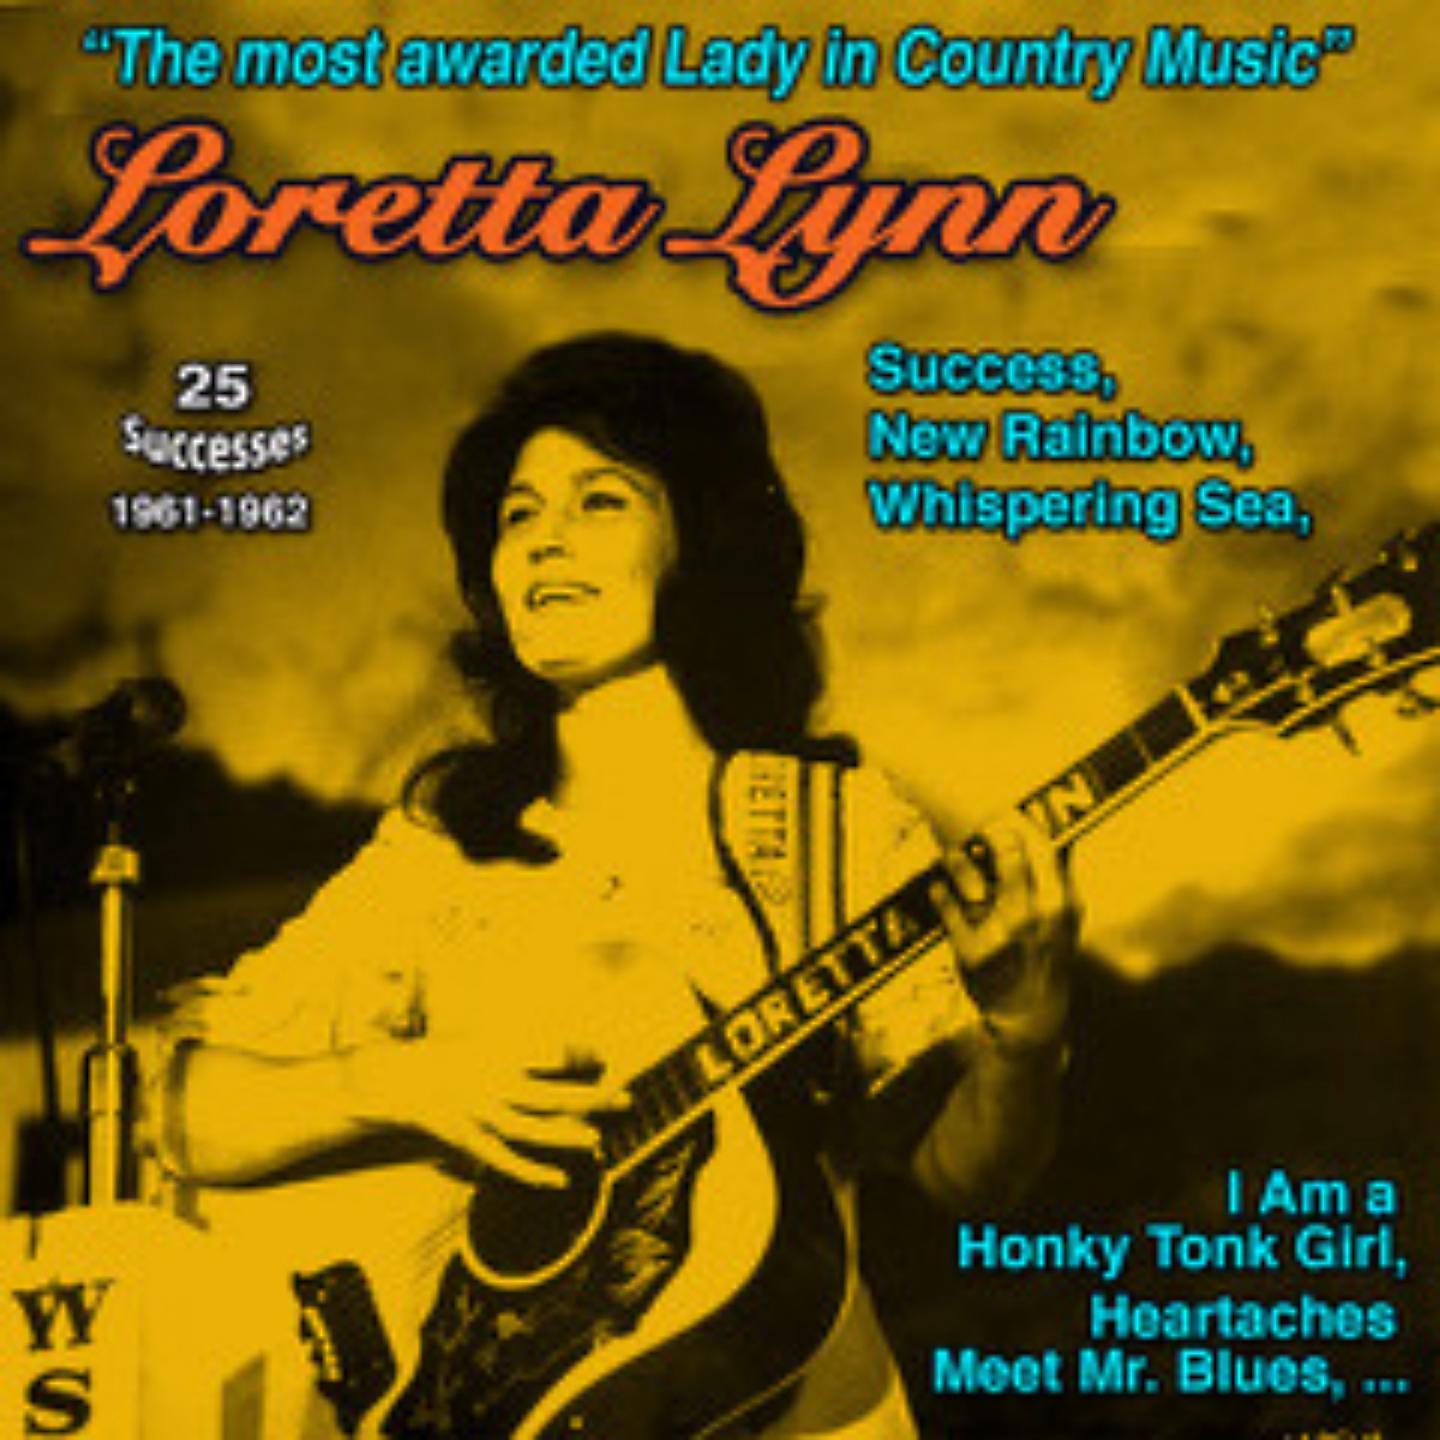 Постер альбома "The Most Awarded Lady in Country Music History": Loretta Lynn